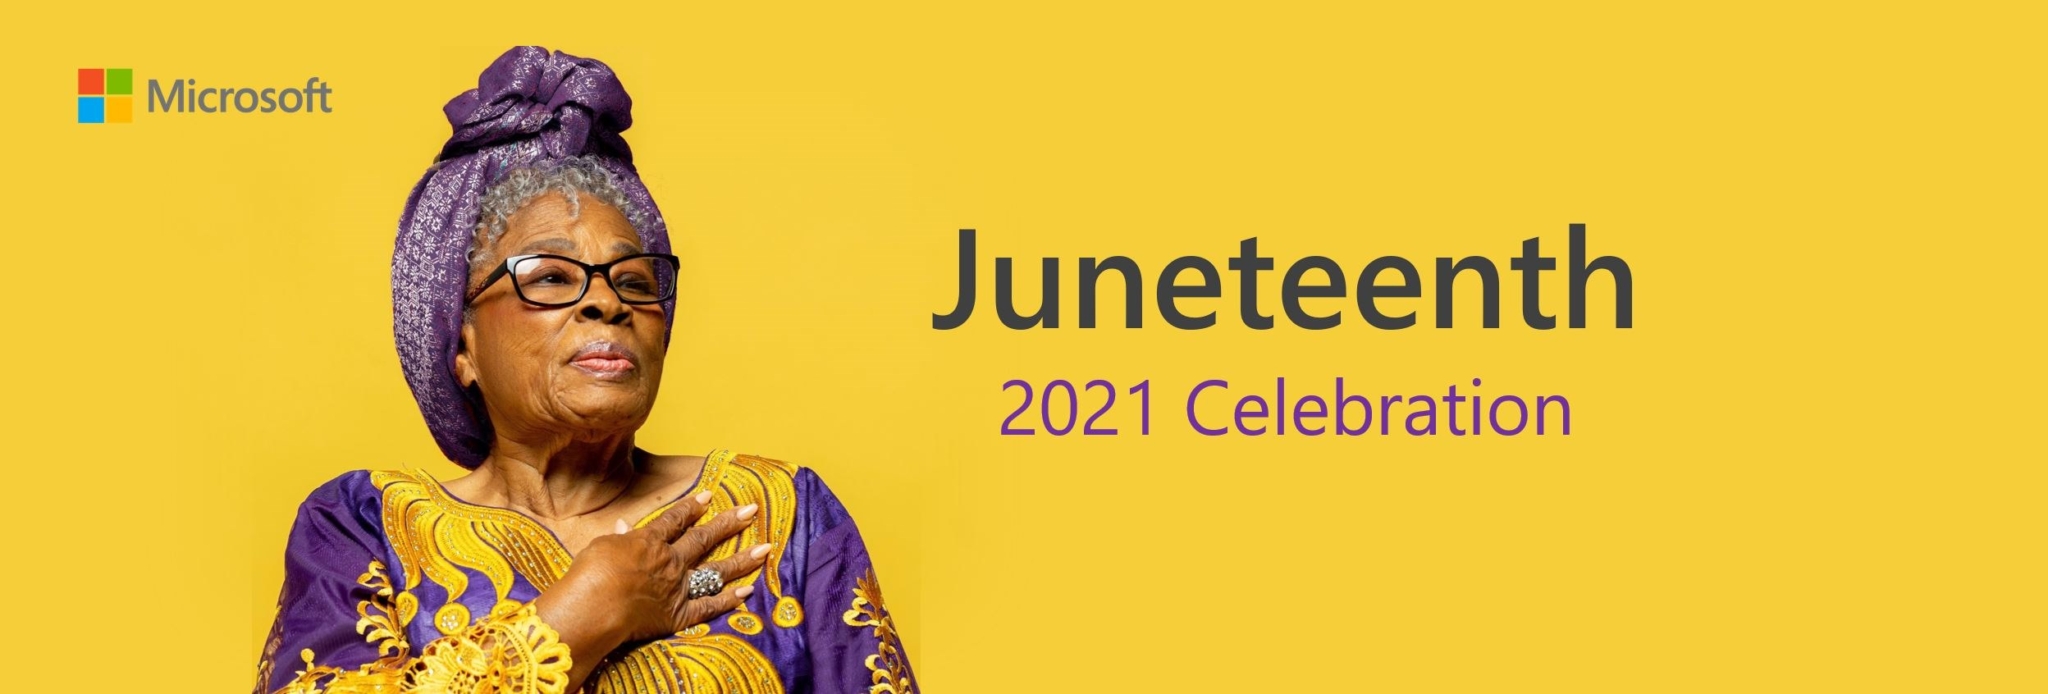 Juneteenth Banner 2 scaled 2021 Juneteenth Celebration by Microsoft